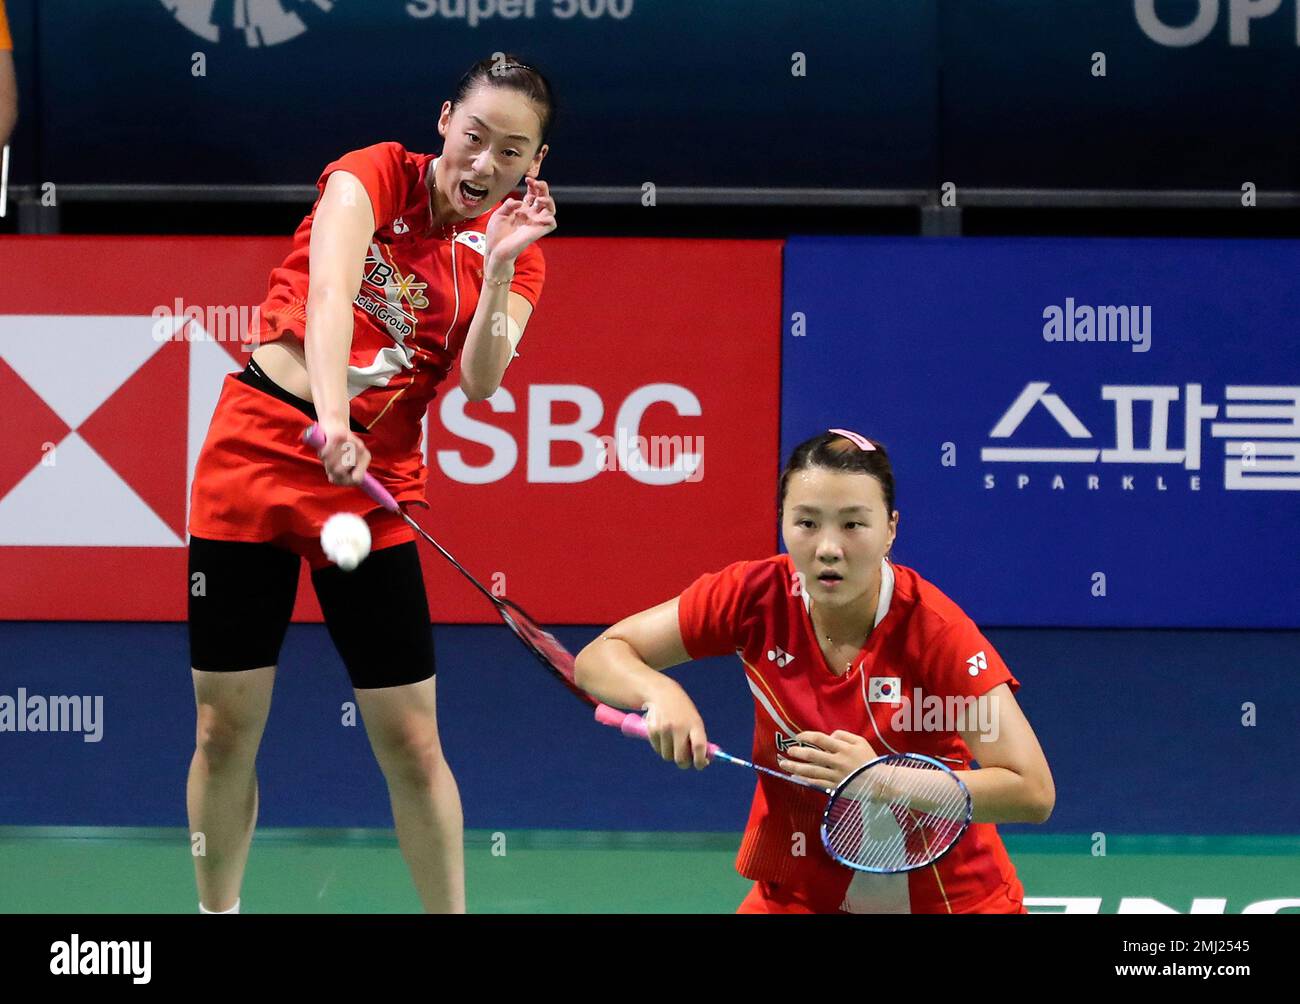 South Koreas Lee So-hee, left, returns a shot as her teammate Shin Seun-chan stands during the womens doubles semi-final match against Japans Nami Matsuyama and Chiharu Shida at the Korea Open Badminton